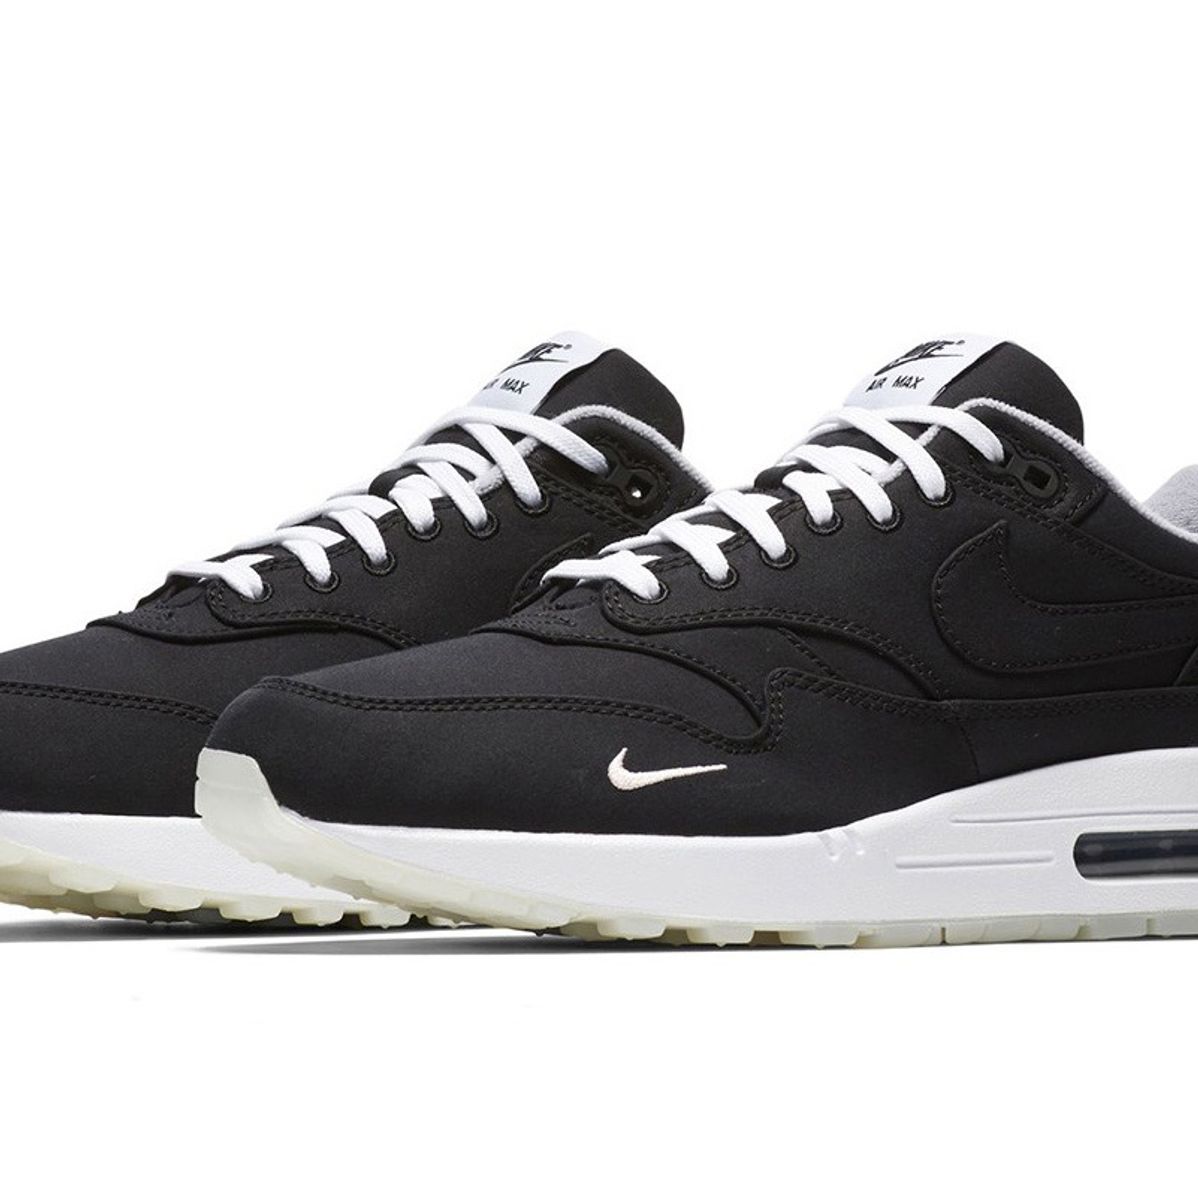 The Dover Street Market x Nike Air 1 Could Be Back for Air Max Day - Sneaker Freaker